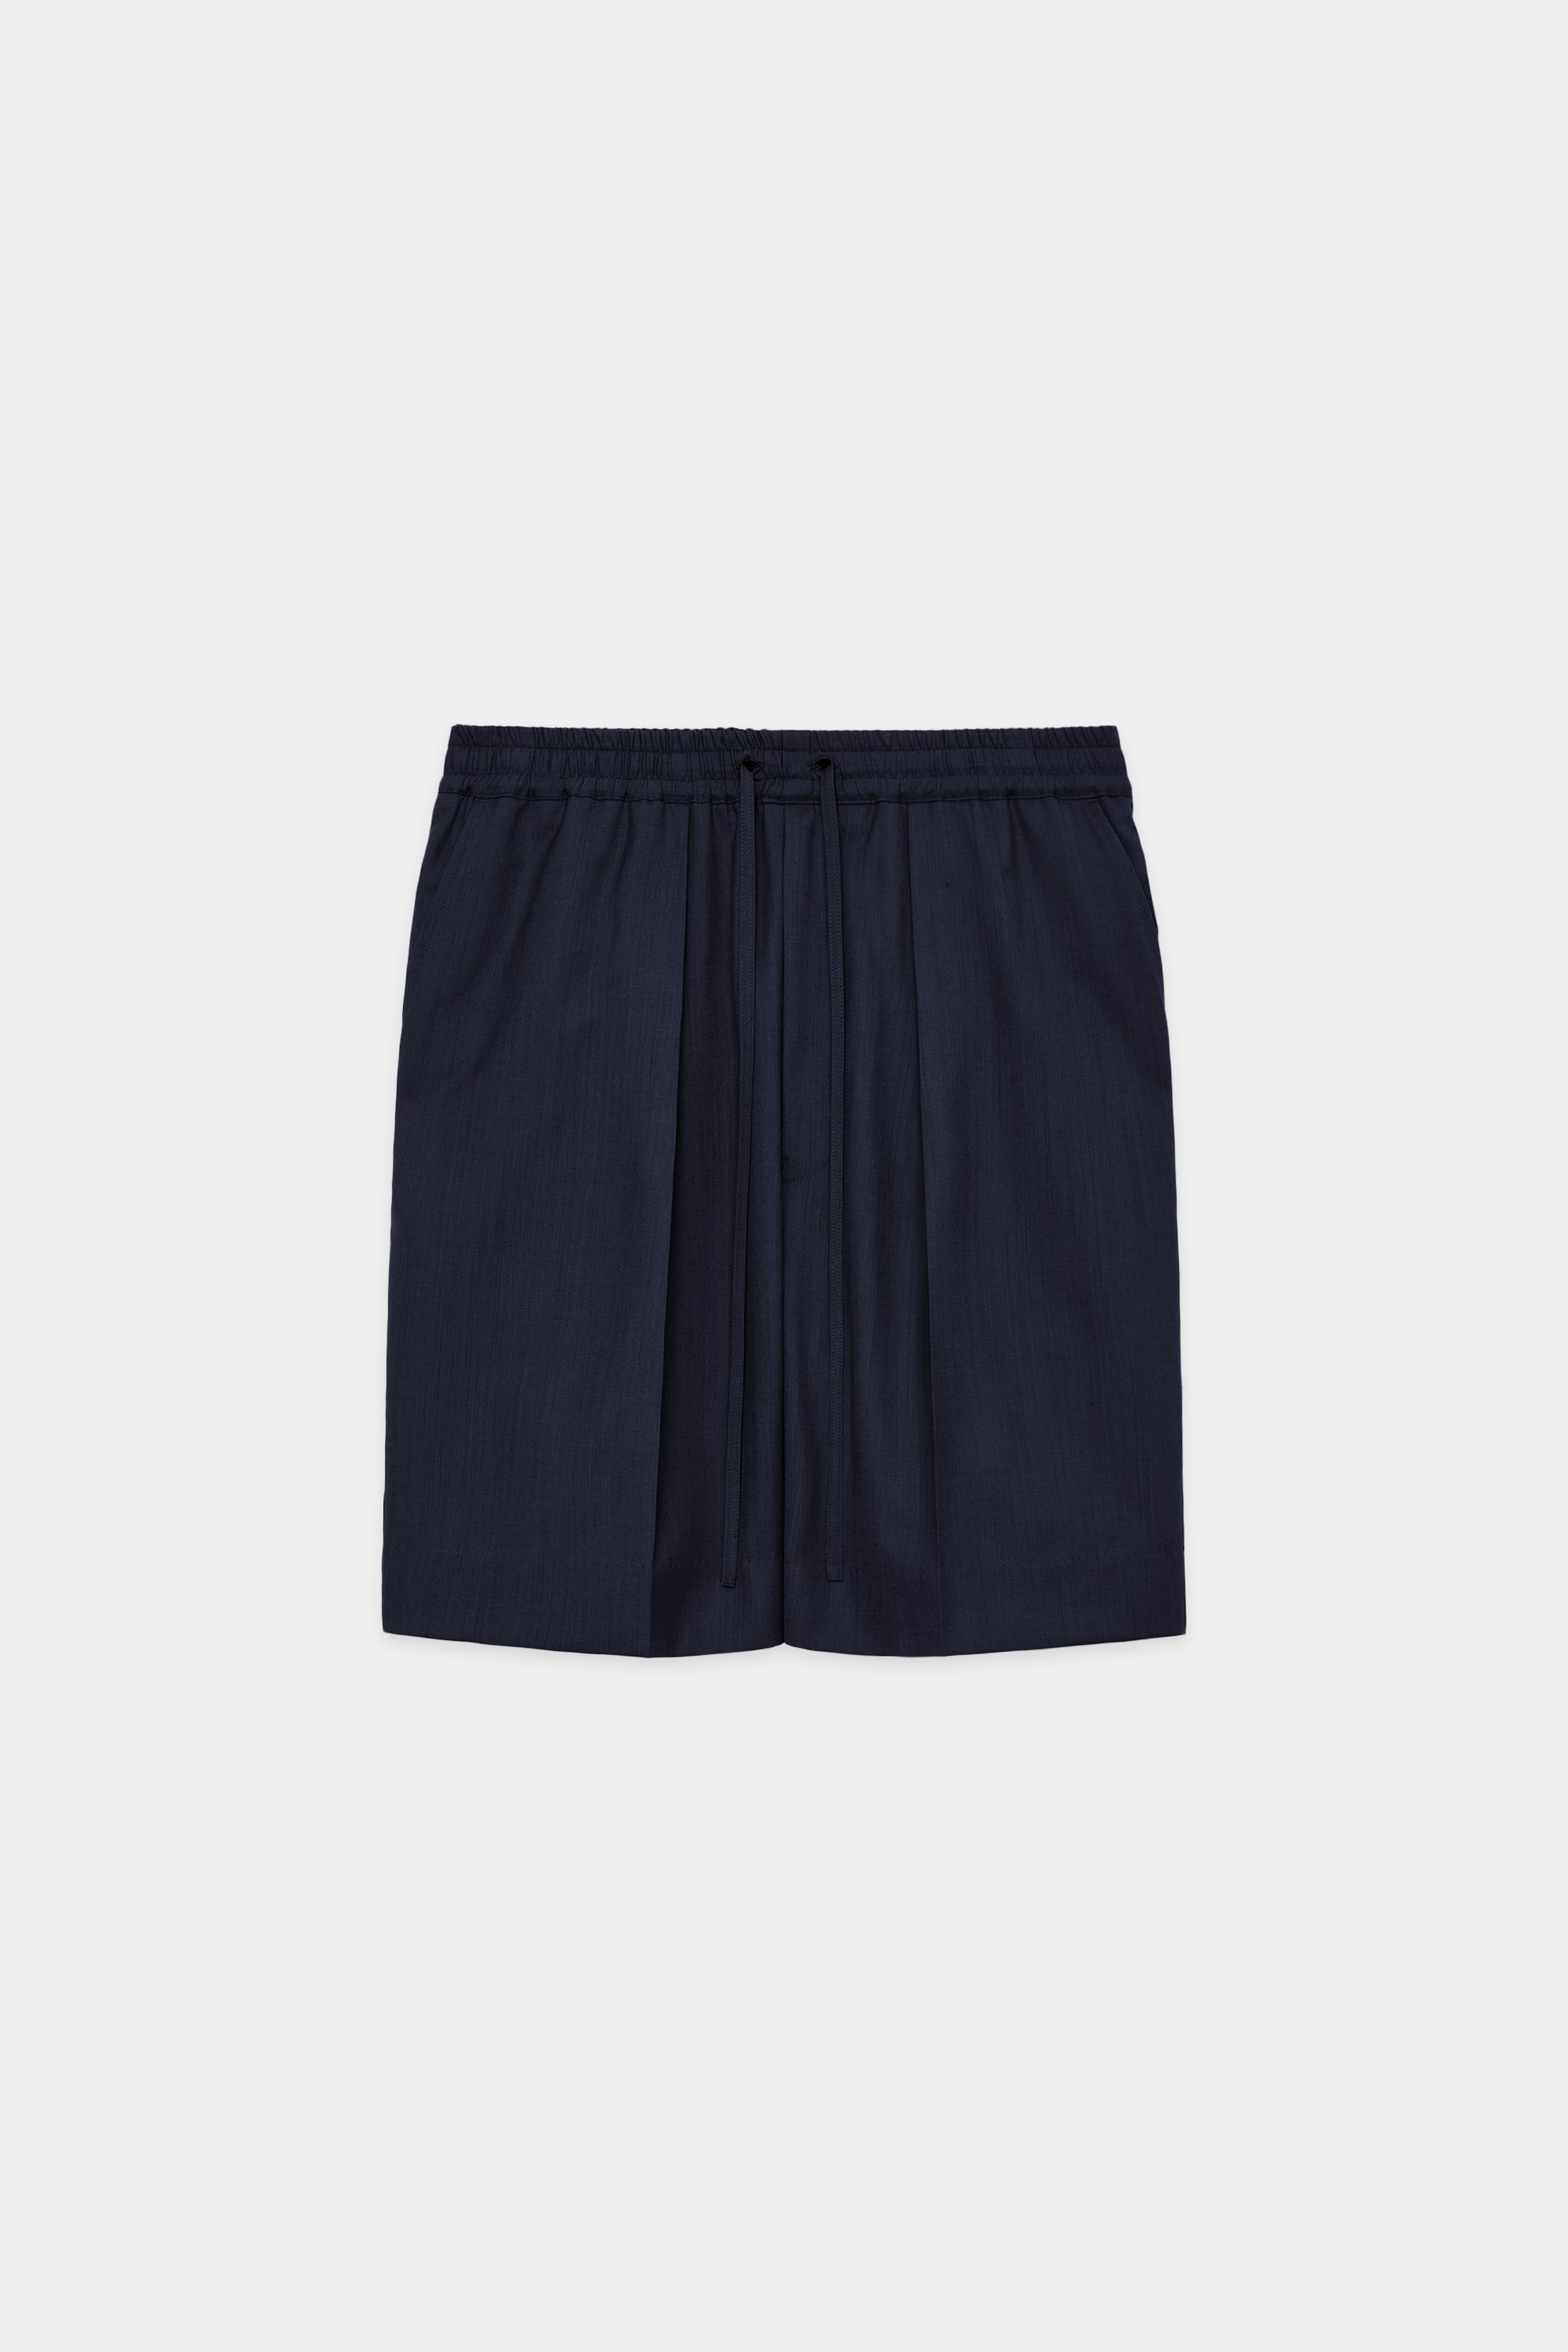 SUPER 120'S WOOL TROPICAL CLASSIC FIT EASY SHORTS, Navy